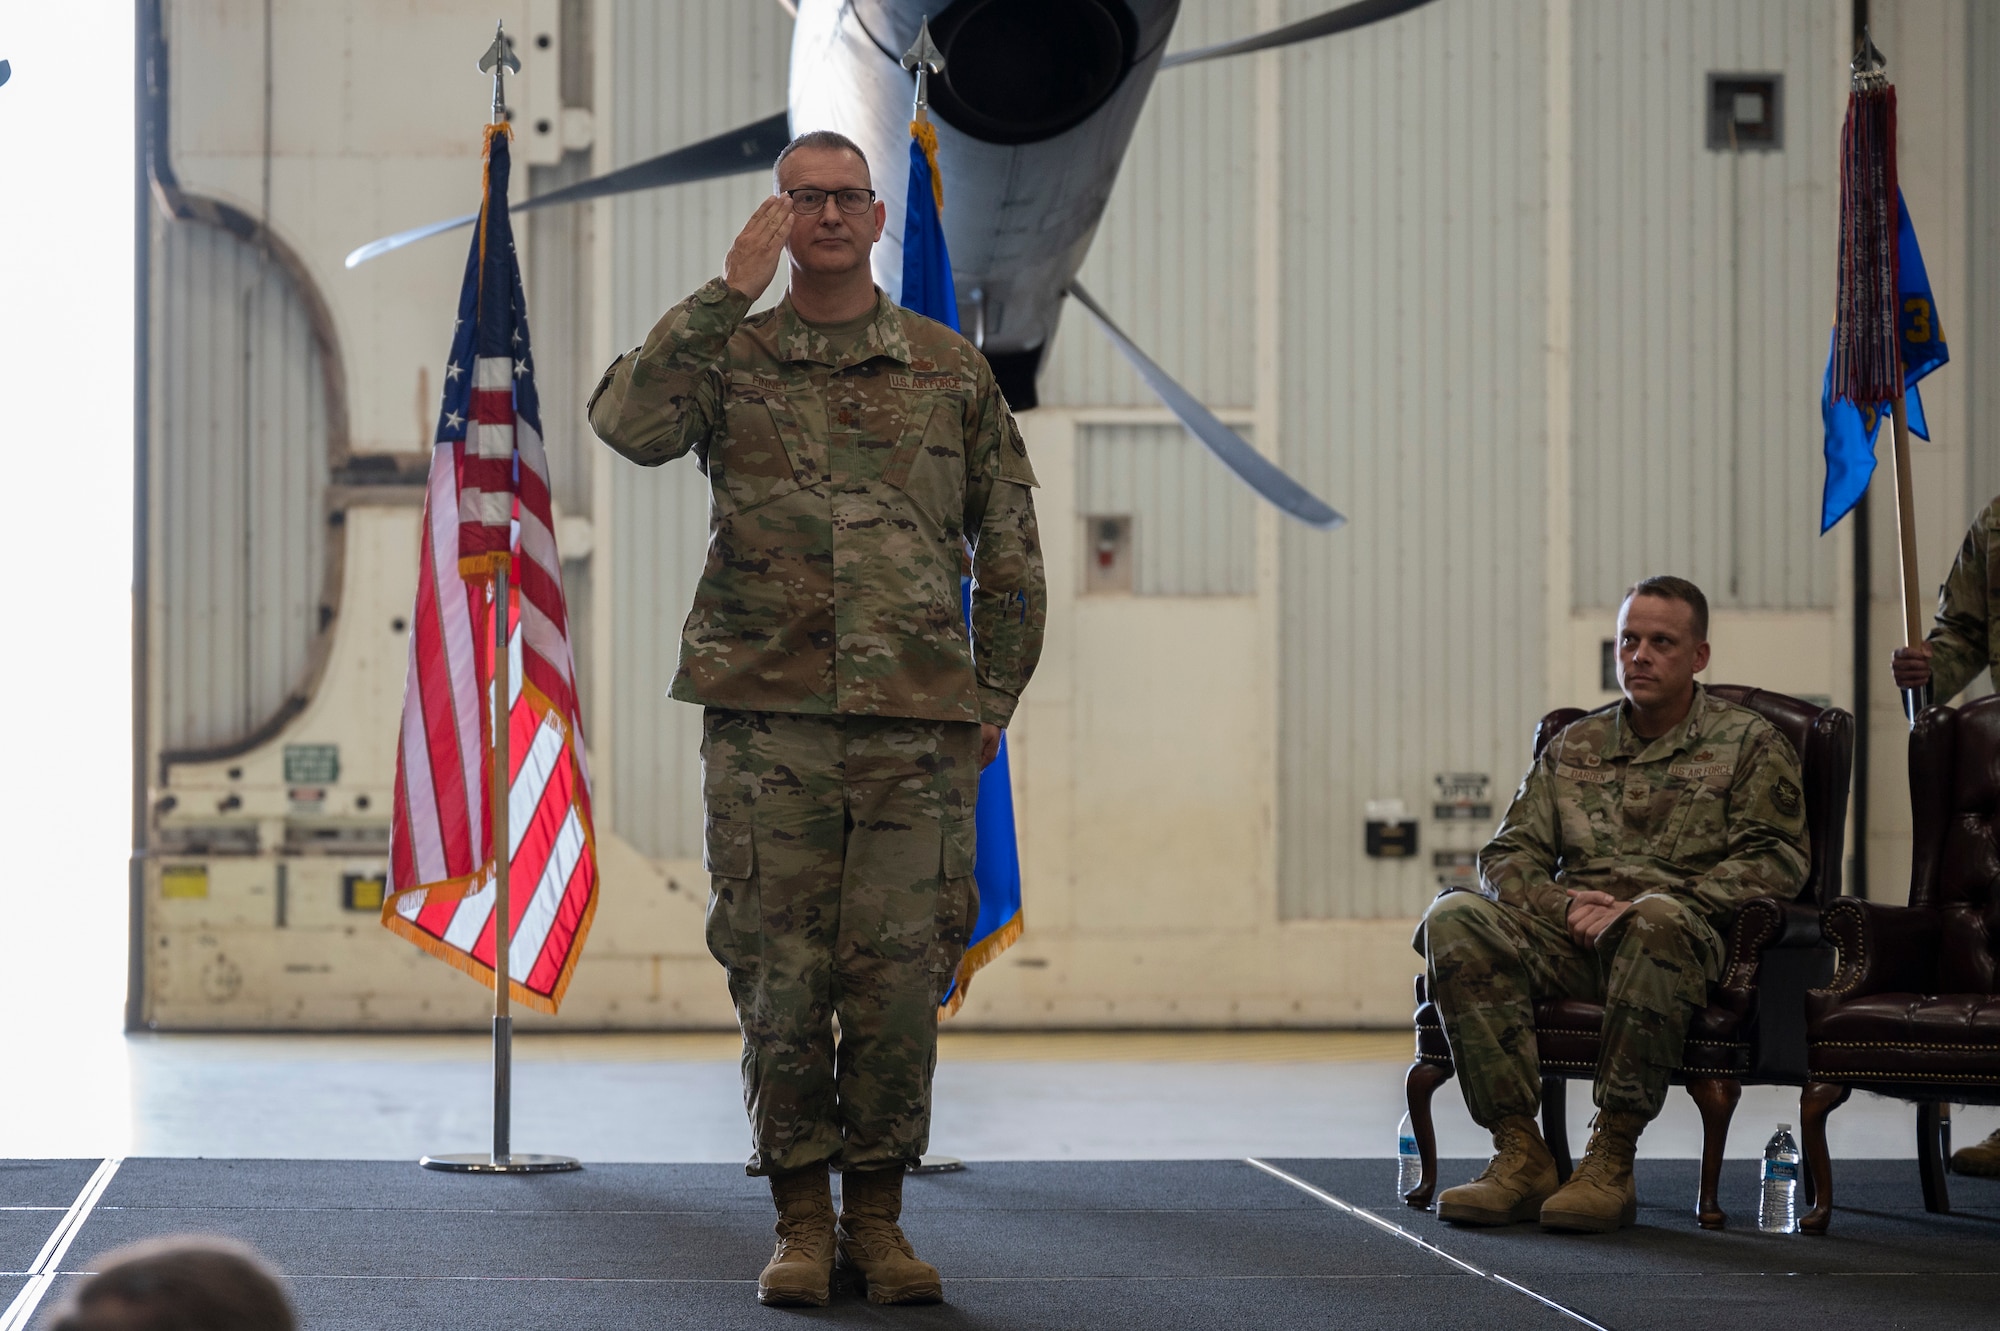 Maj. Daniel Finney,  incoming 317th Maintenance Squadron commander, renders his first salute as commander during a change of command ceremony at Dyess Air Force Base, Texas, 17 June 2022. The 317th MXS’s maintenance backshop responsibilities include fuel cell, propulsion, isochronal inspection, aero repair of key flight control surfaces & landing gear components and propeller valve housing rebuild. (U.S. Air Force photo by Senior Airman Reilly McGuire)